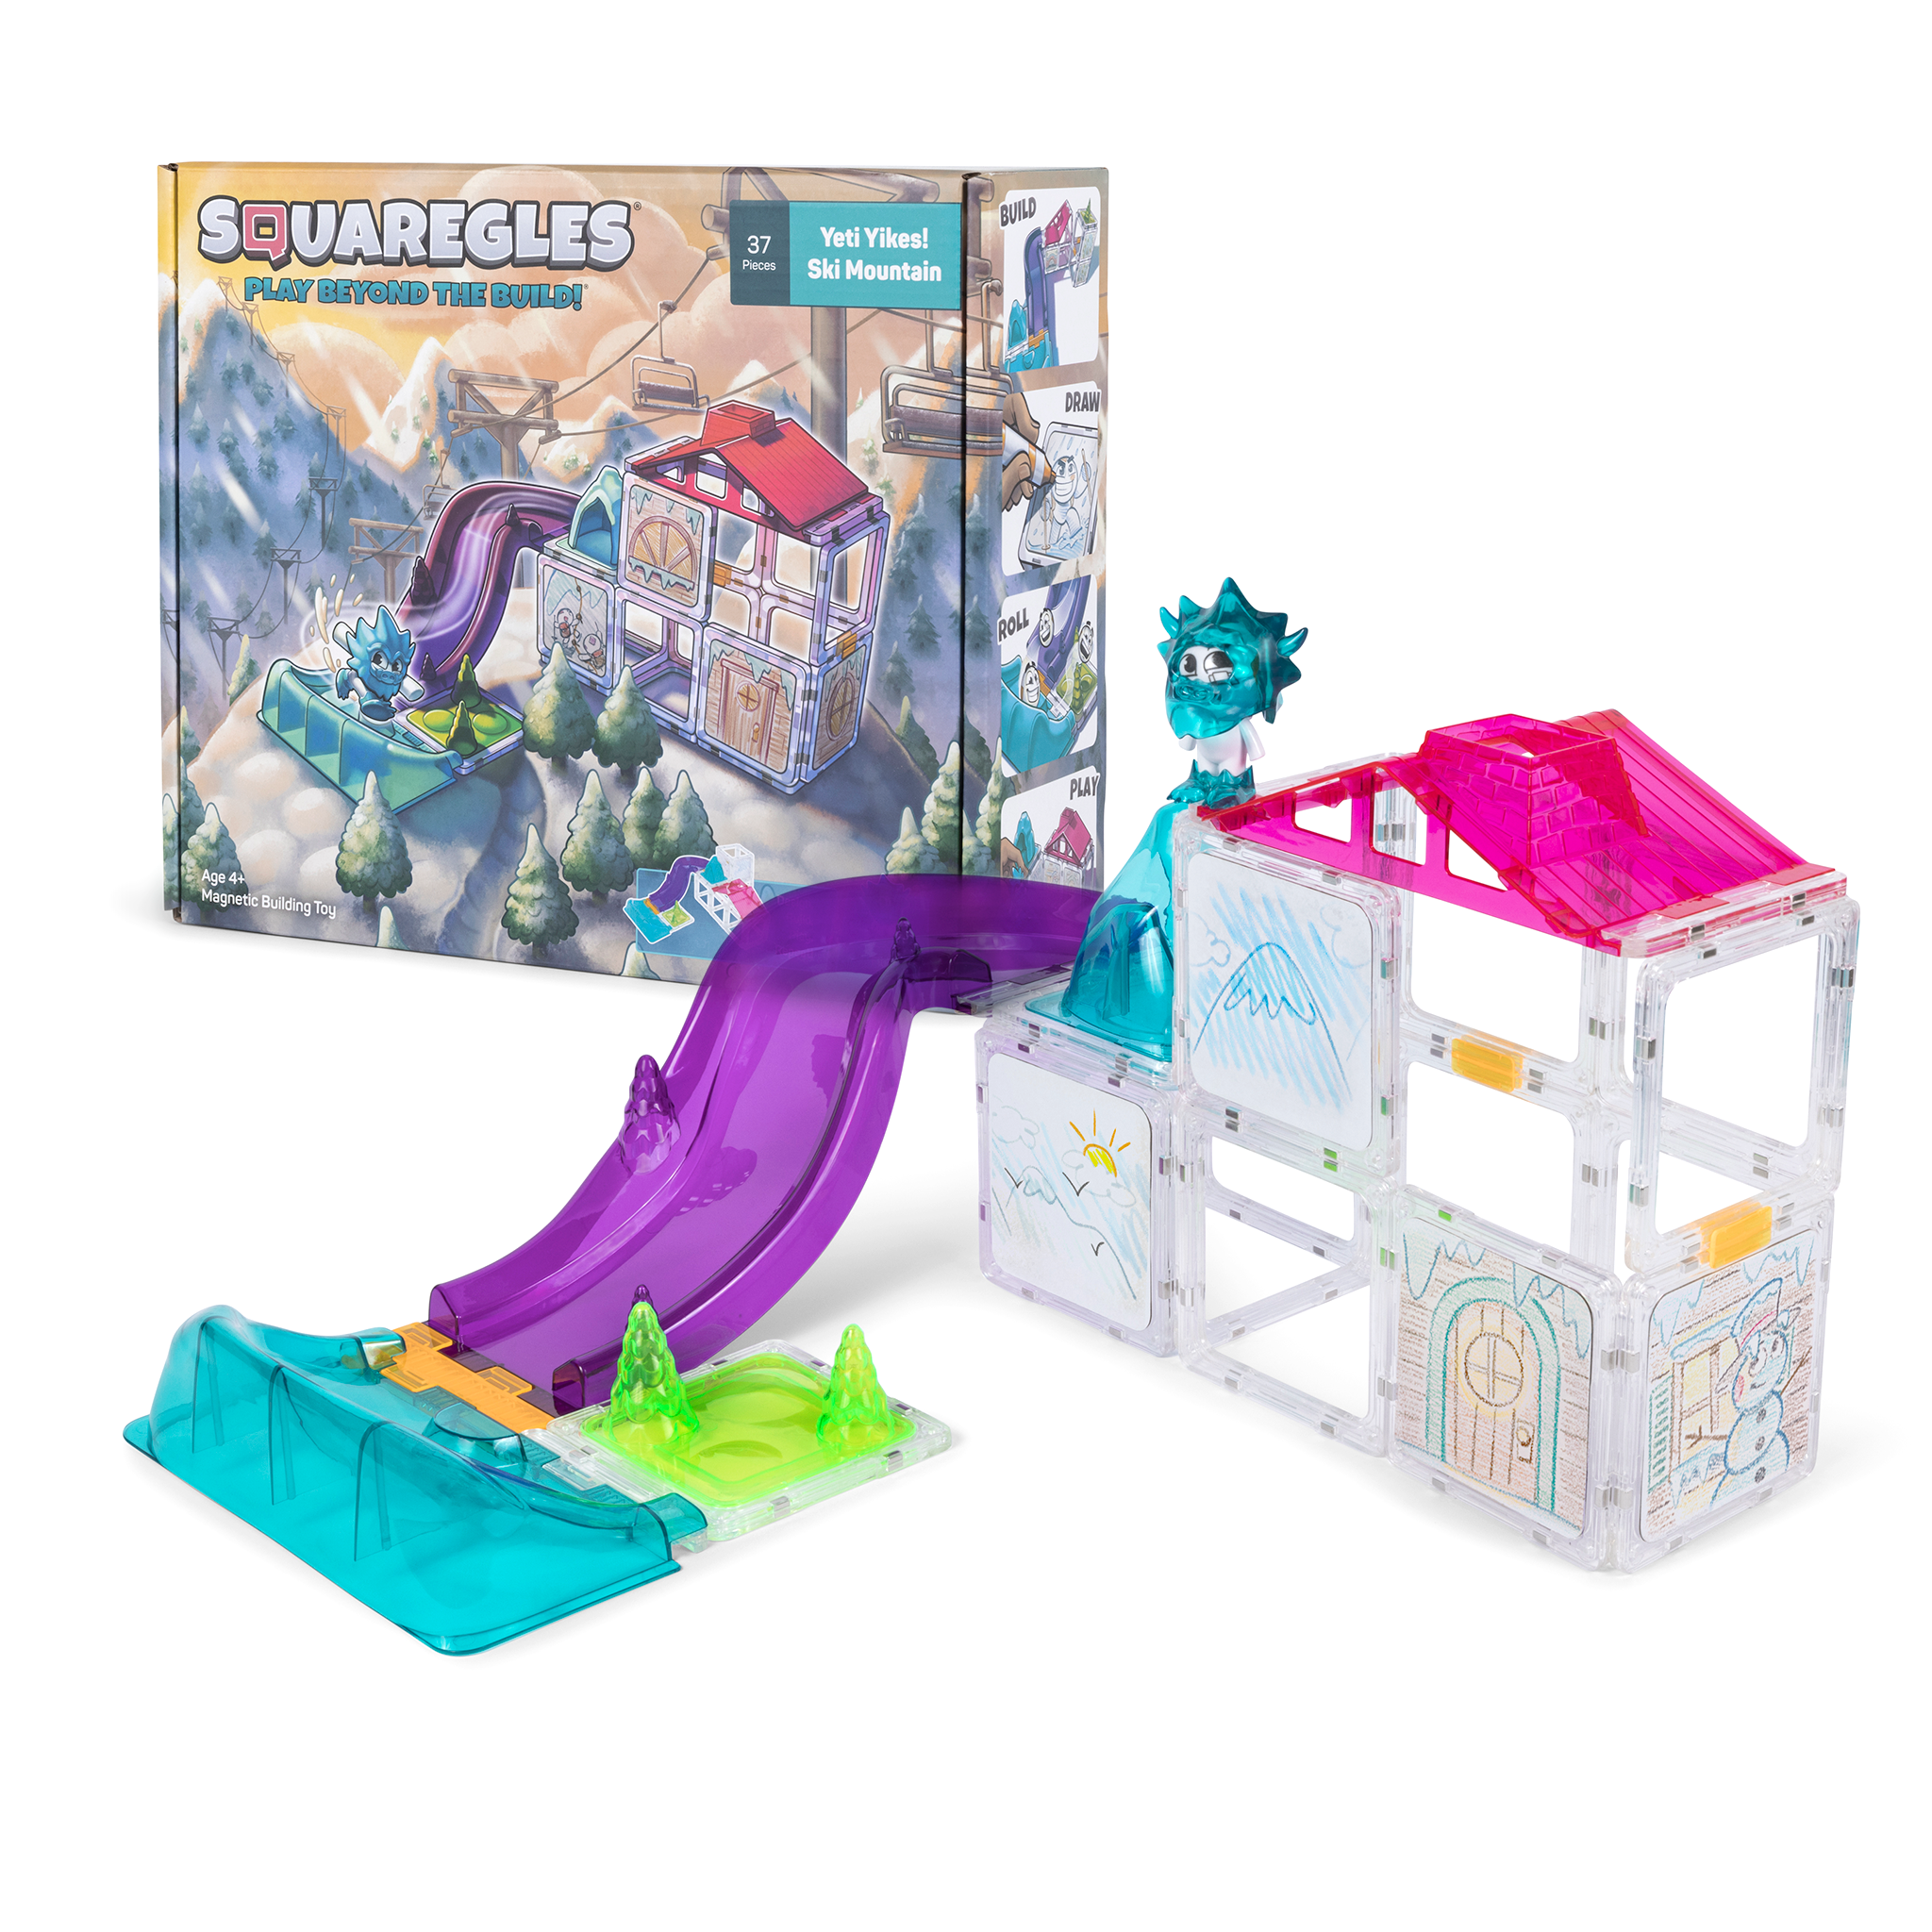 Build using pieces from Yeti Yikes! Ski Mountain with the box pictured